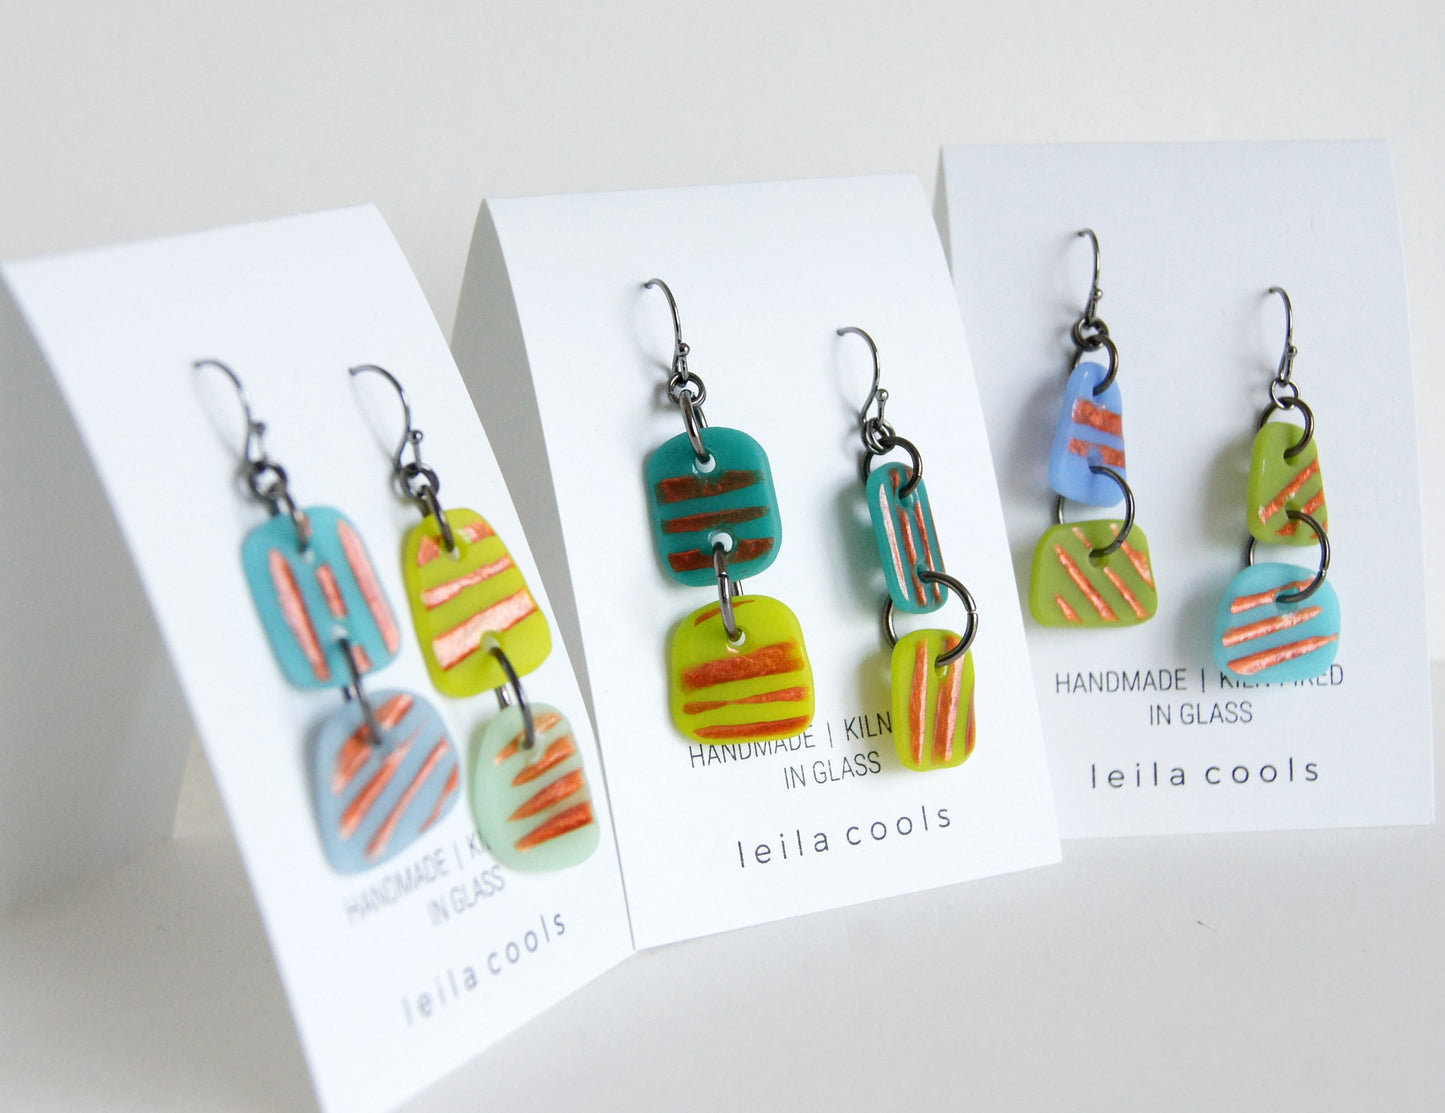 fun handmade mismatched pressed glass earrings